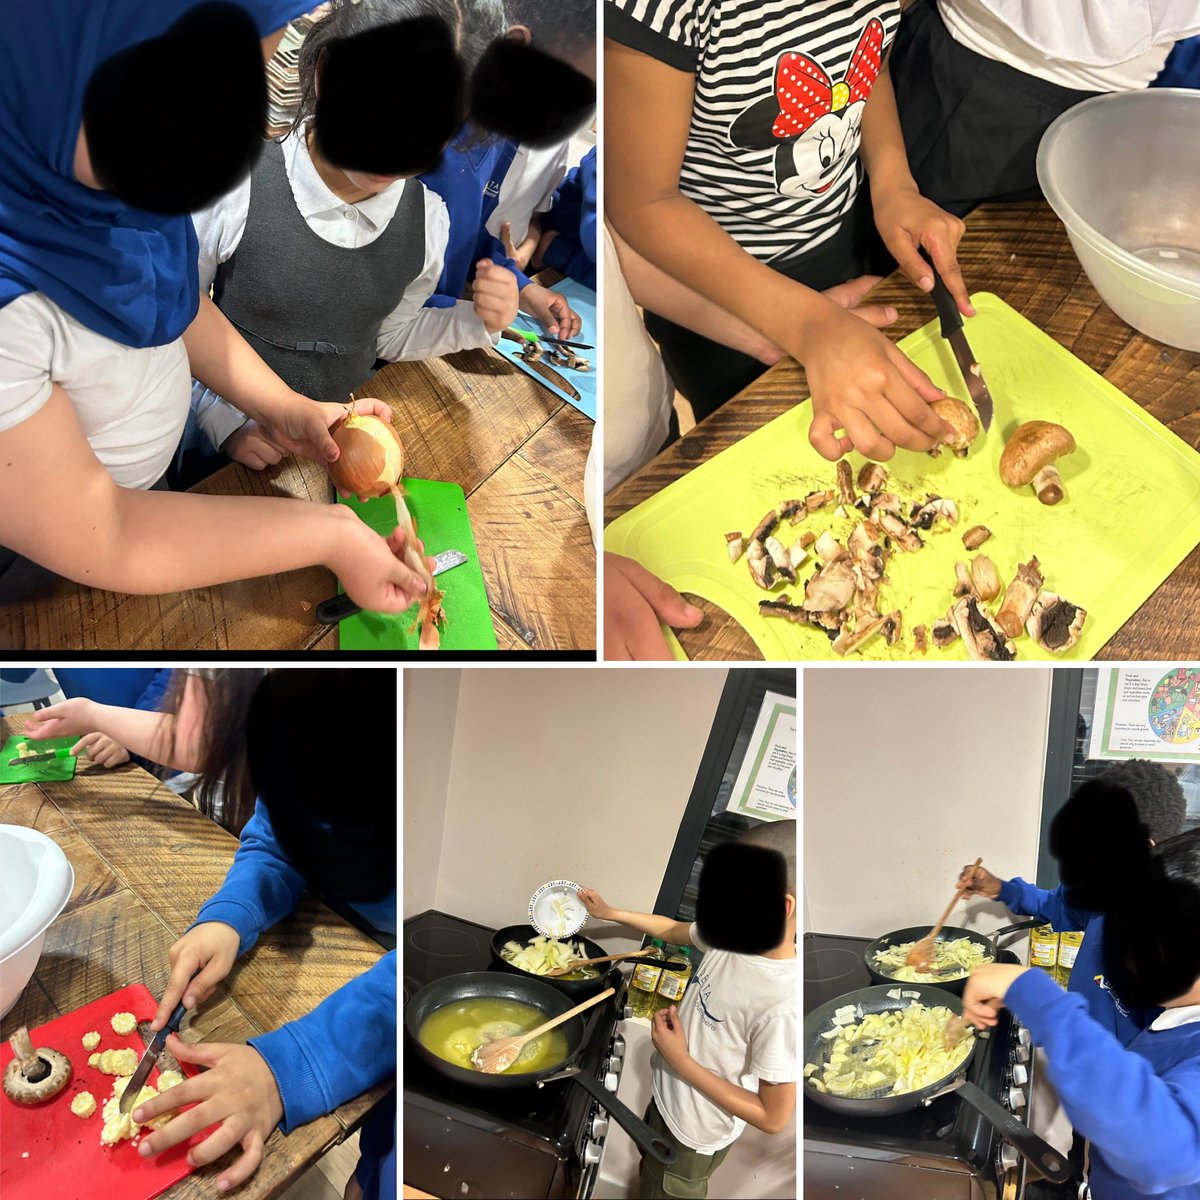 Year 3 pupils have been actively engaged in cooking mushroom risotto. Pupils worked together in a collective effort to both prepare and cook the risotto. 

@ClassroomK @DeltaSouthmere @MrsBinnsSMPA 

#DeltaPupils #ReadingList #CookingLesson #Risotto